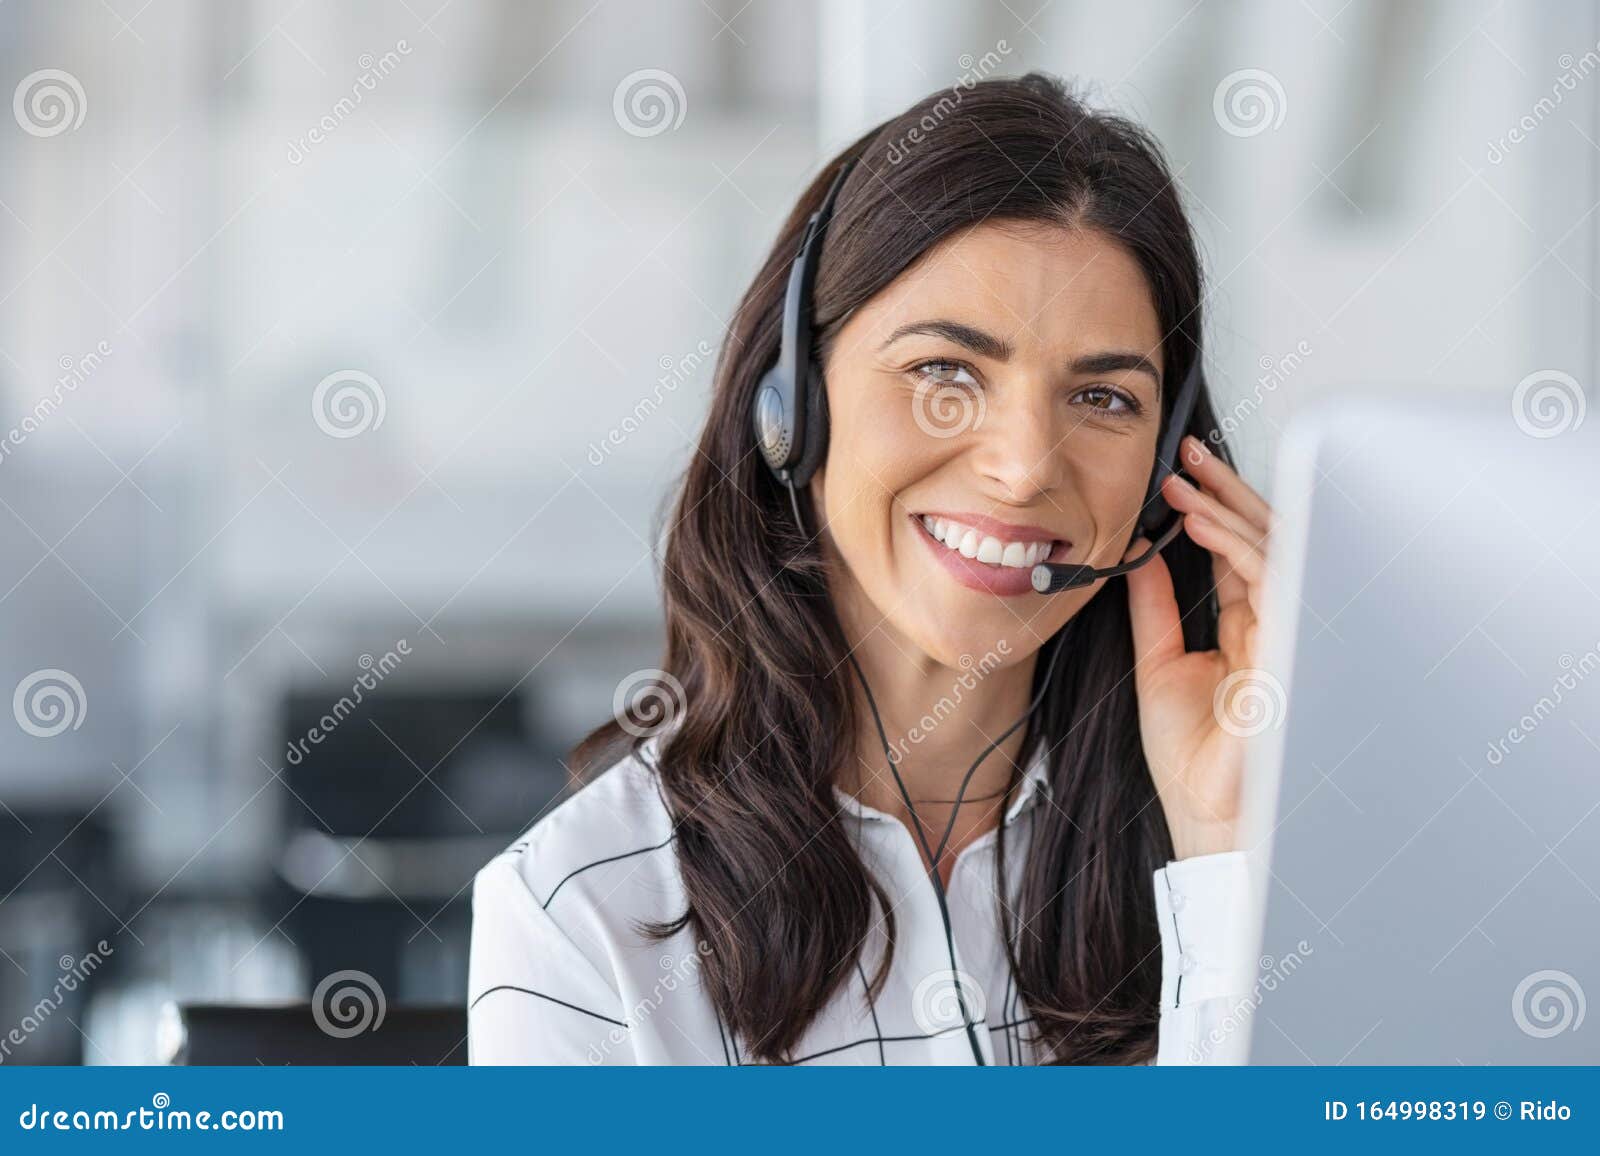 happy smiling woman working in call center